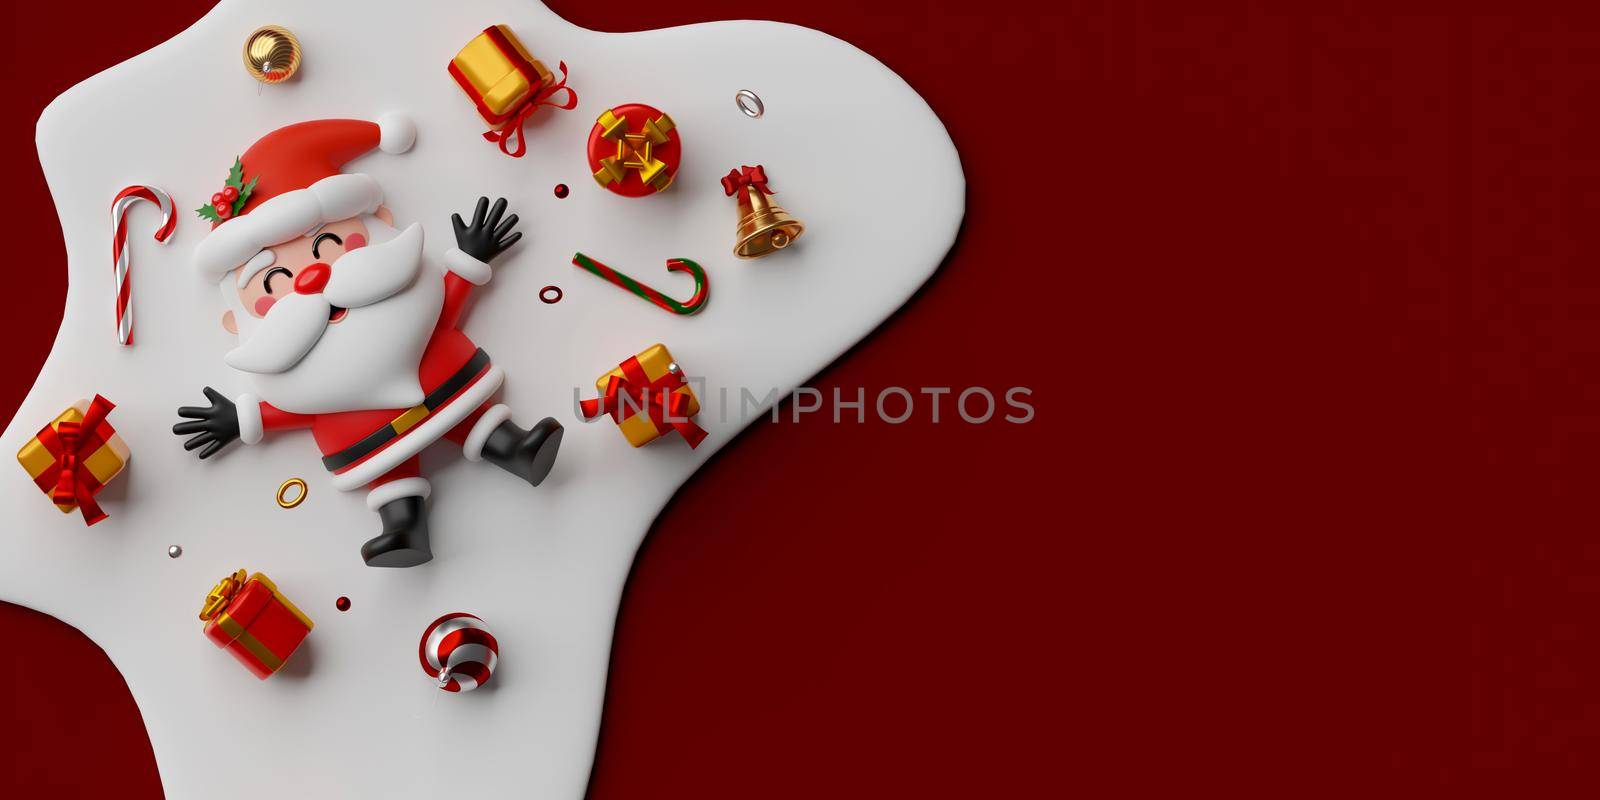 Top view of Santa Claus lay on snow ground with gift box, 3d illustration by nutzchotwarut